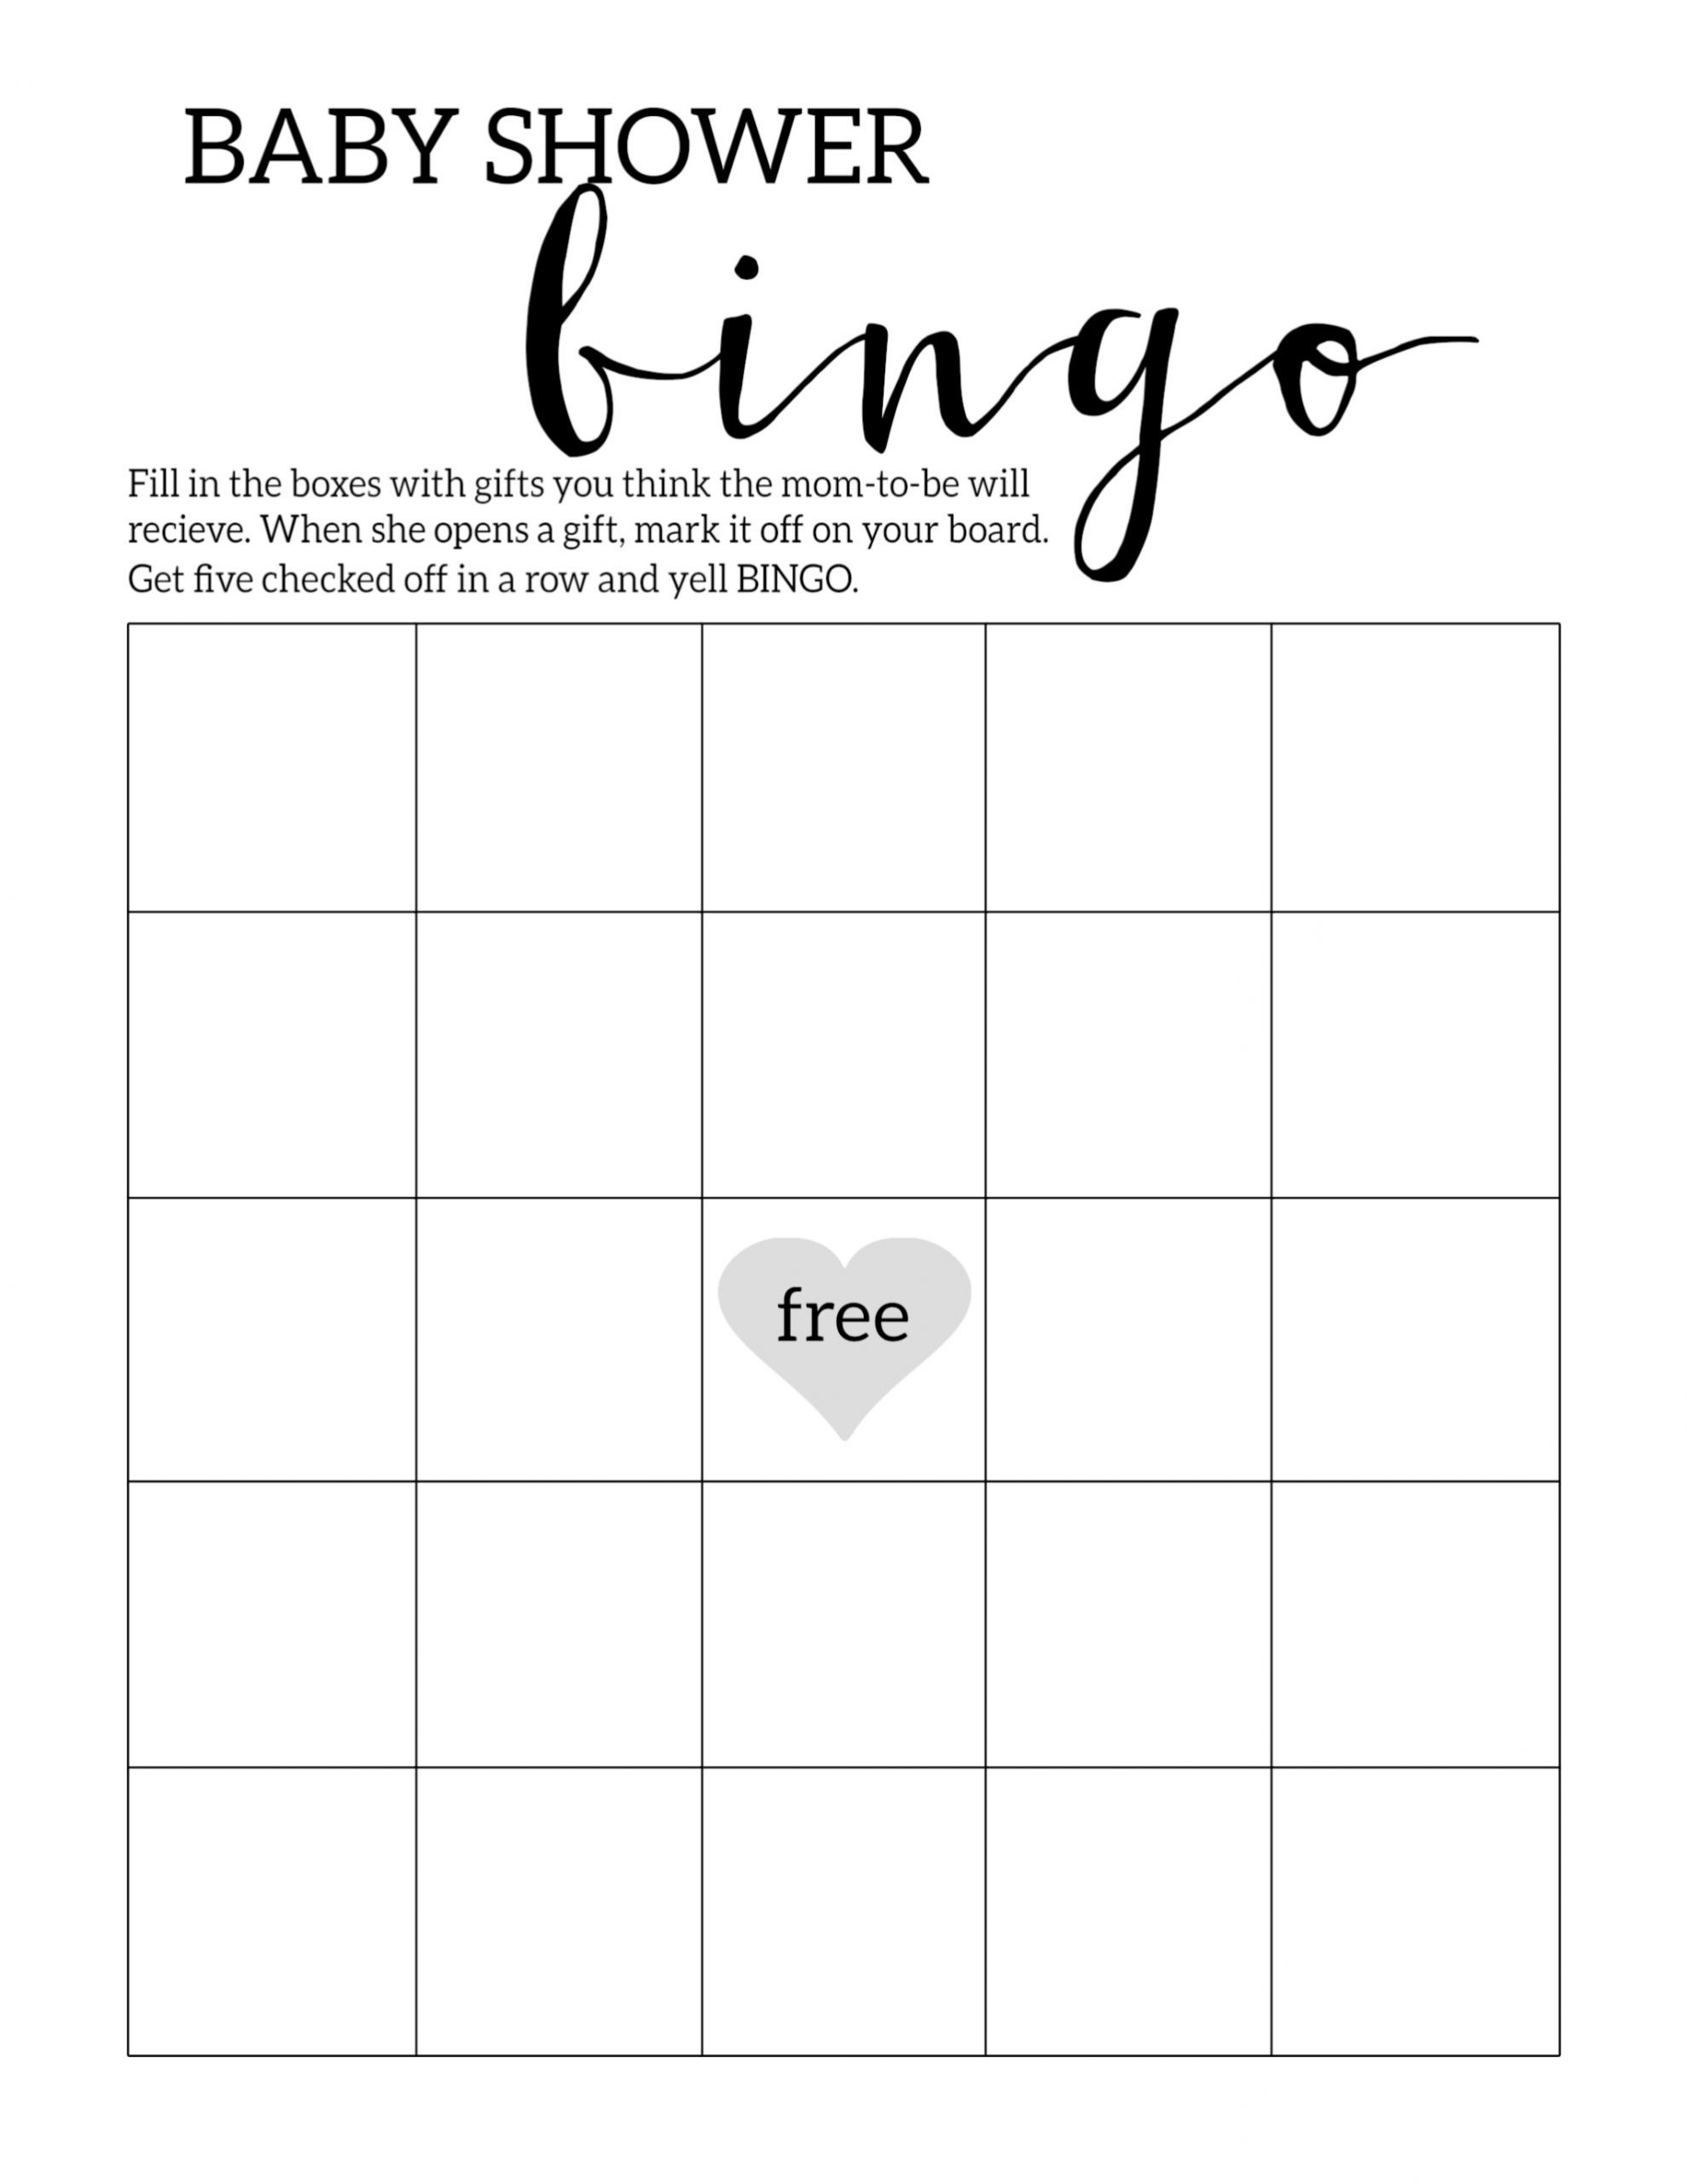 Baby Shower Bingo Printable Cards Template - Paper Trail Design